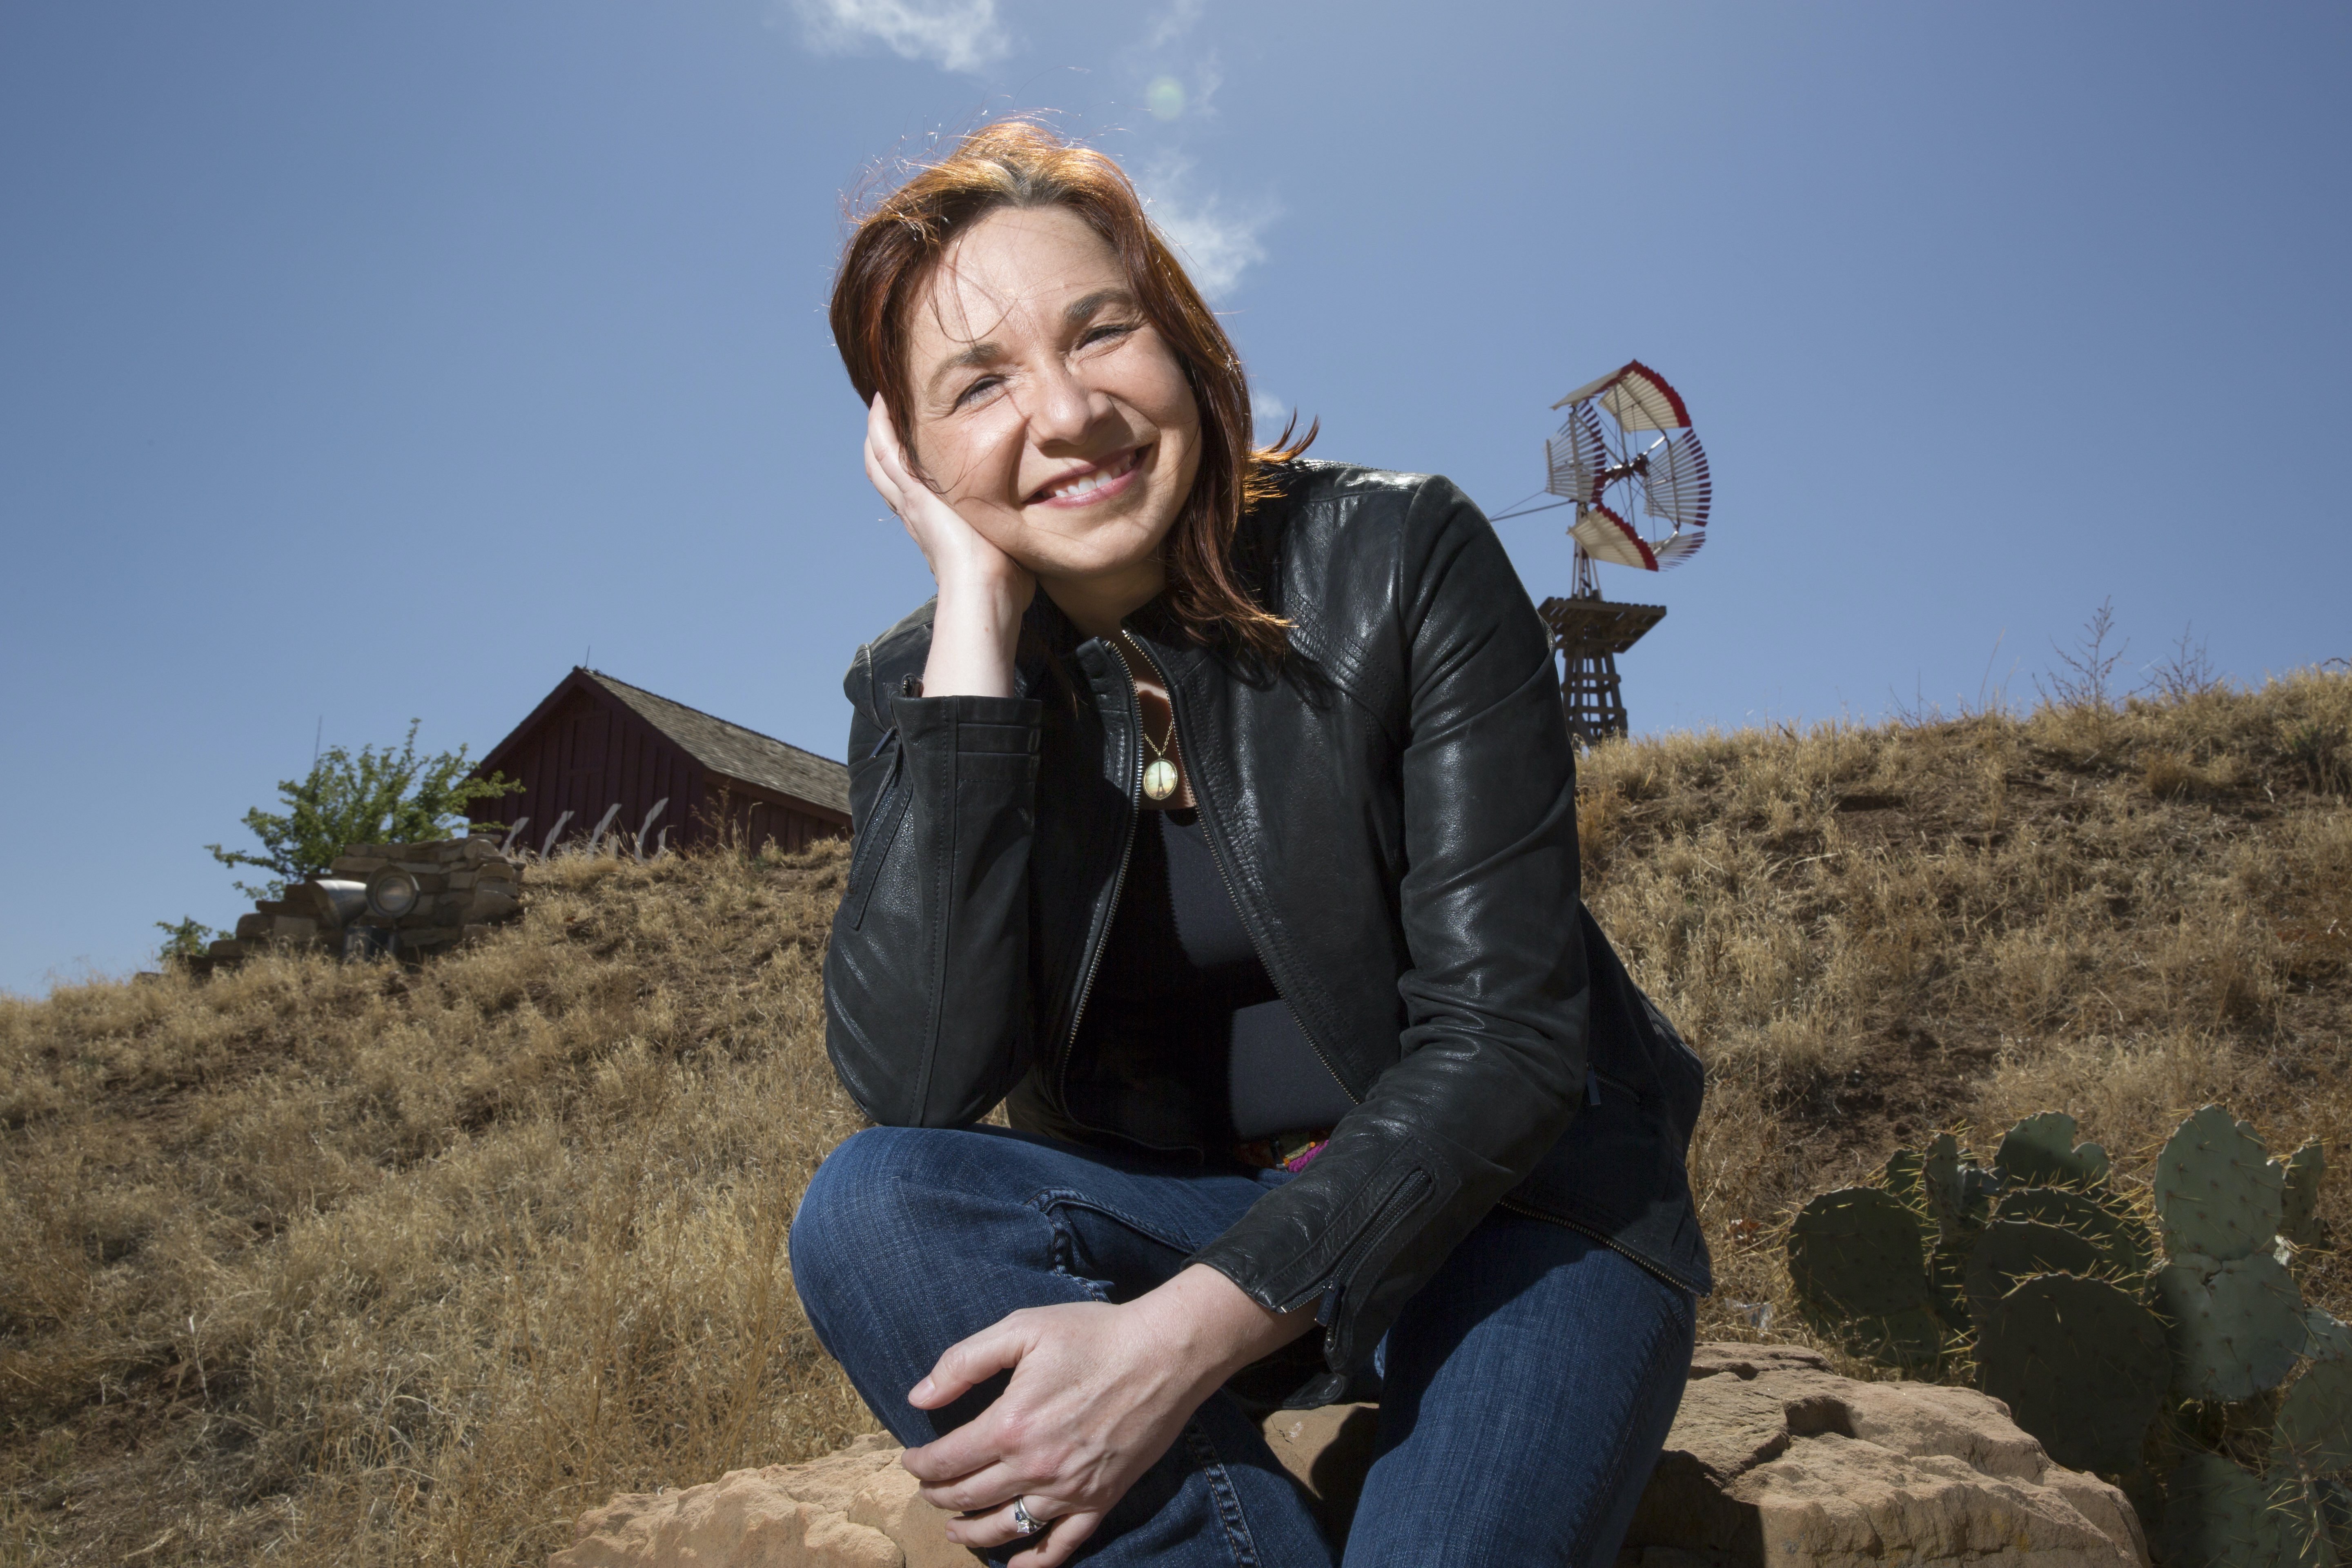 A photo of a woman kneeling outside in grass smiling with a barn in the background.